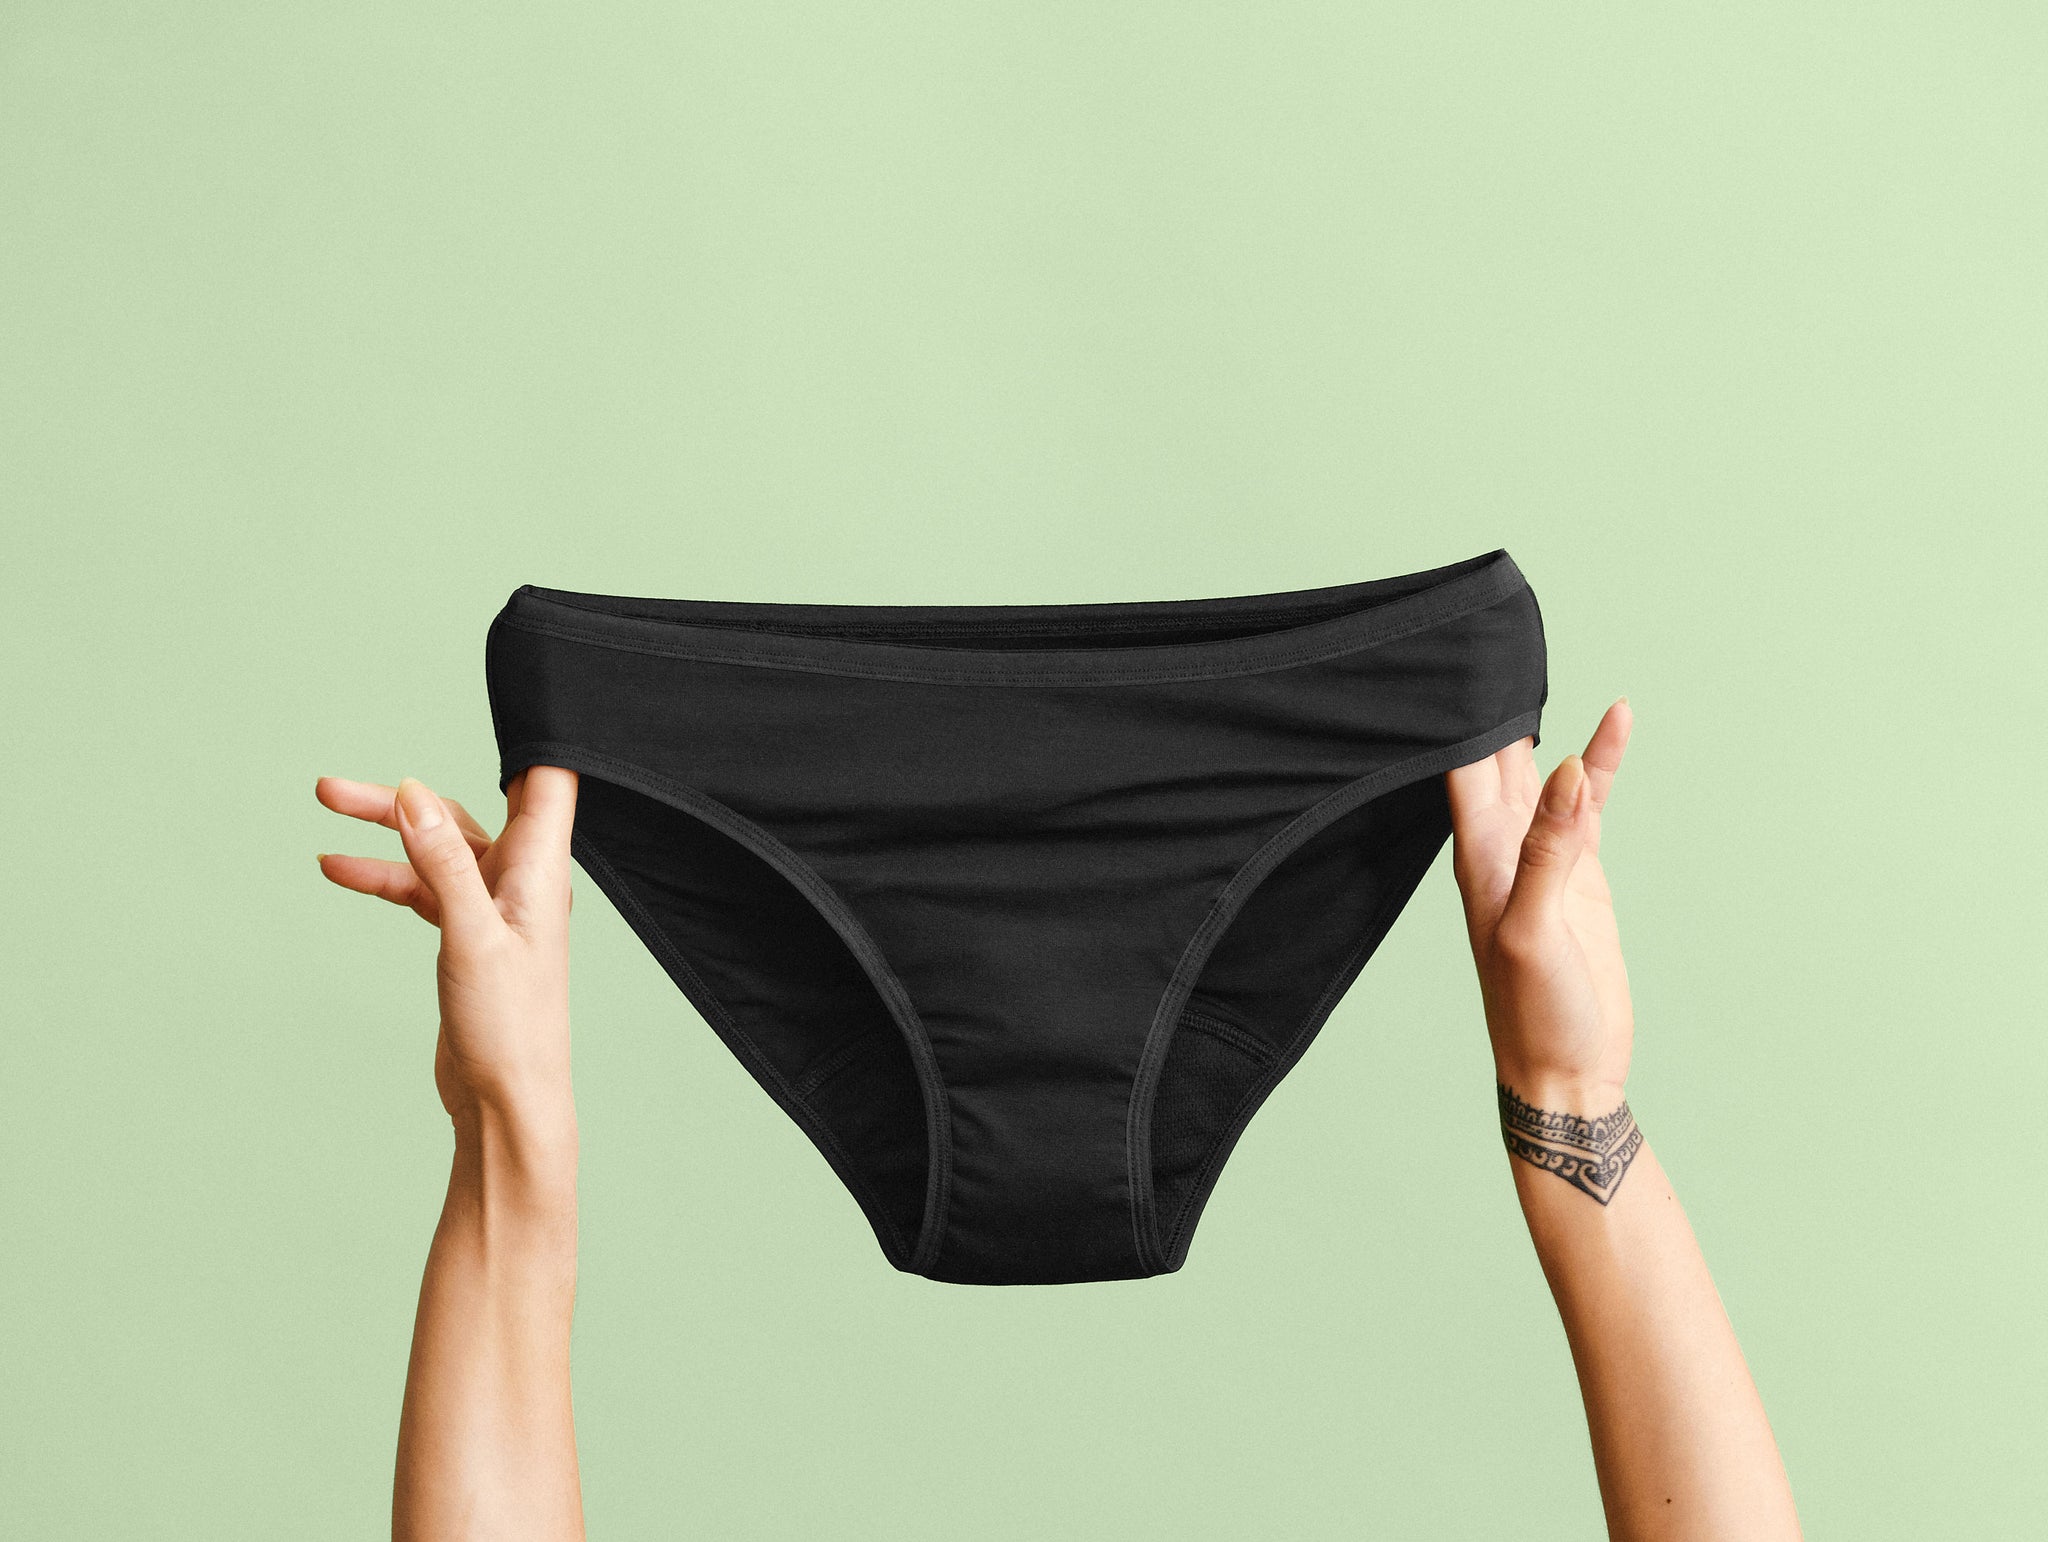 Period Underwear: Benefits, Uses, and Tips – AllMatters